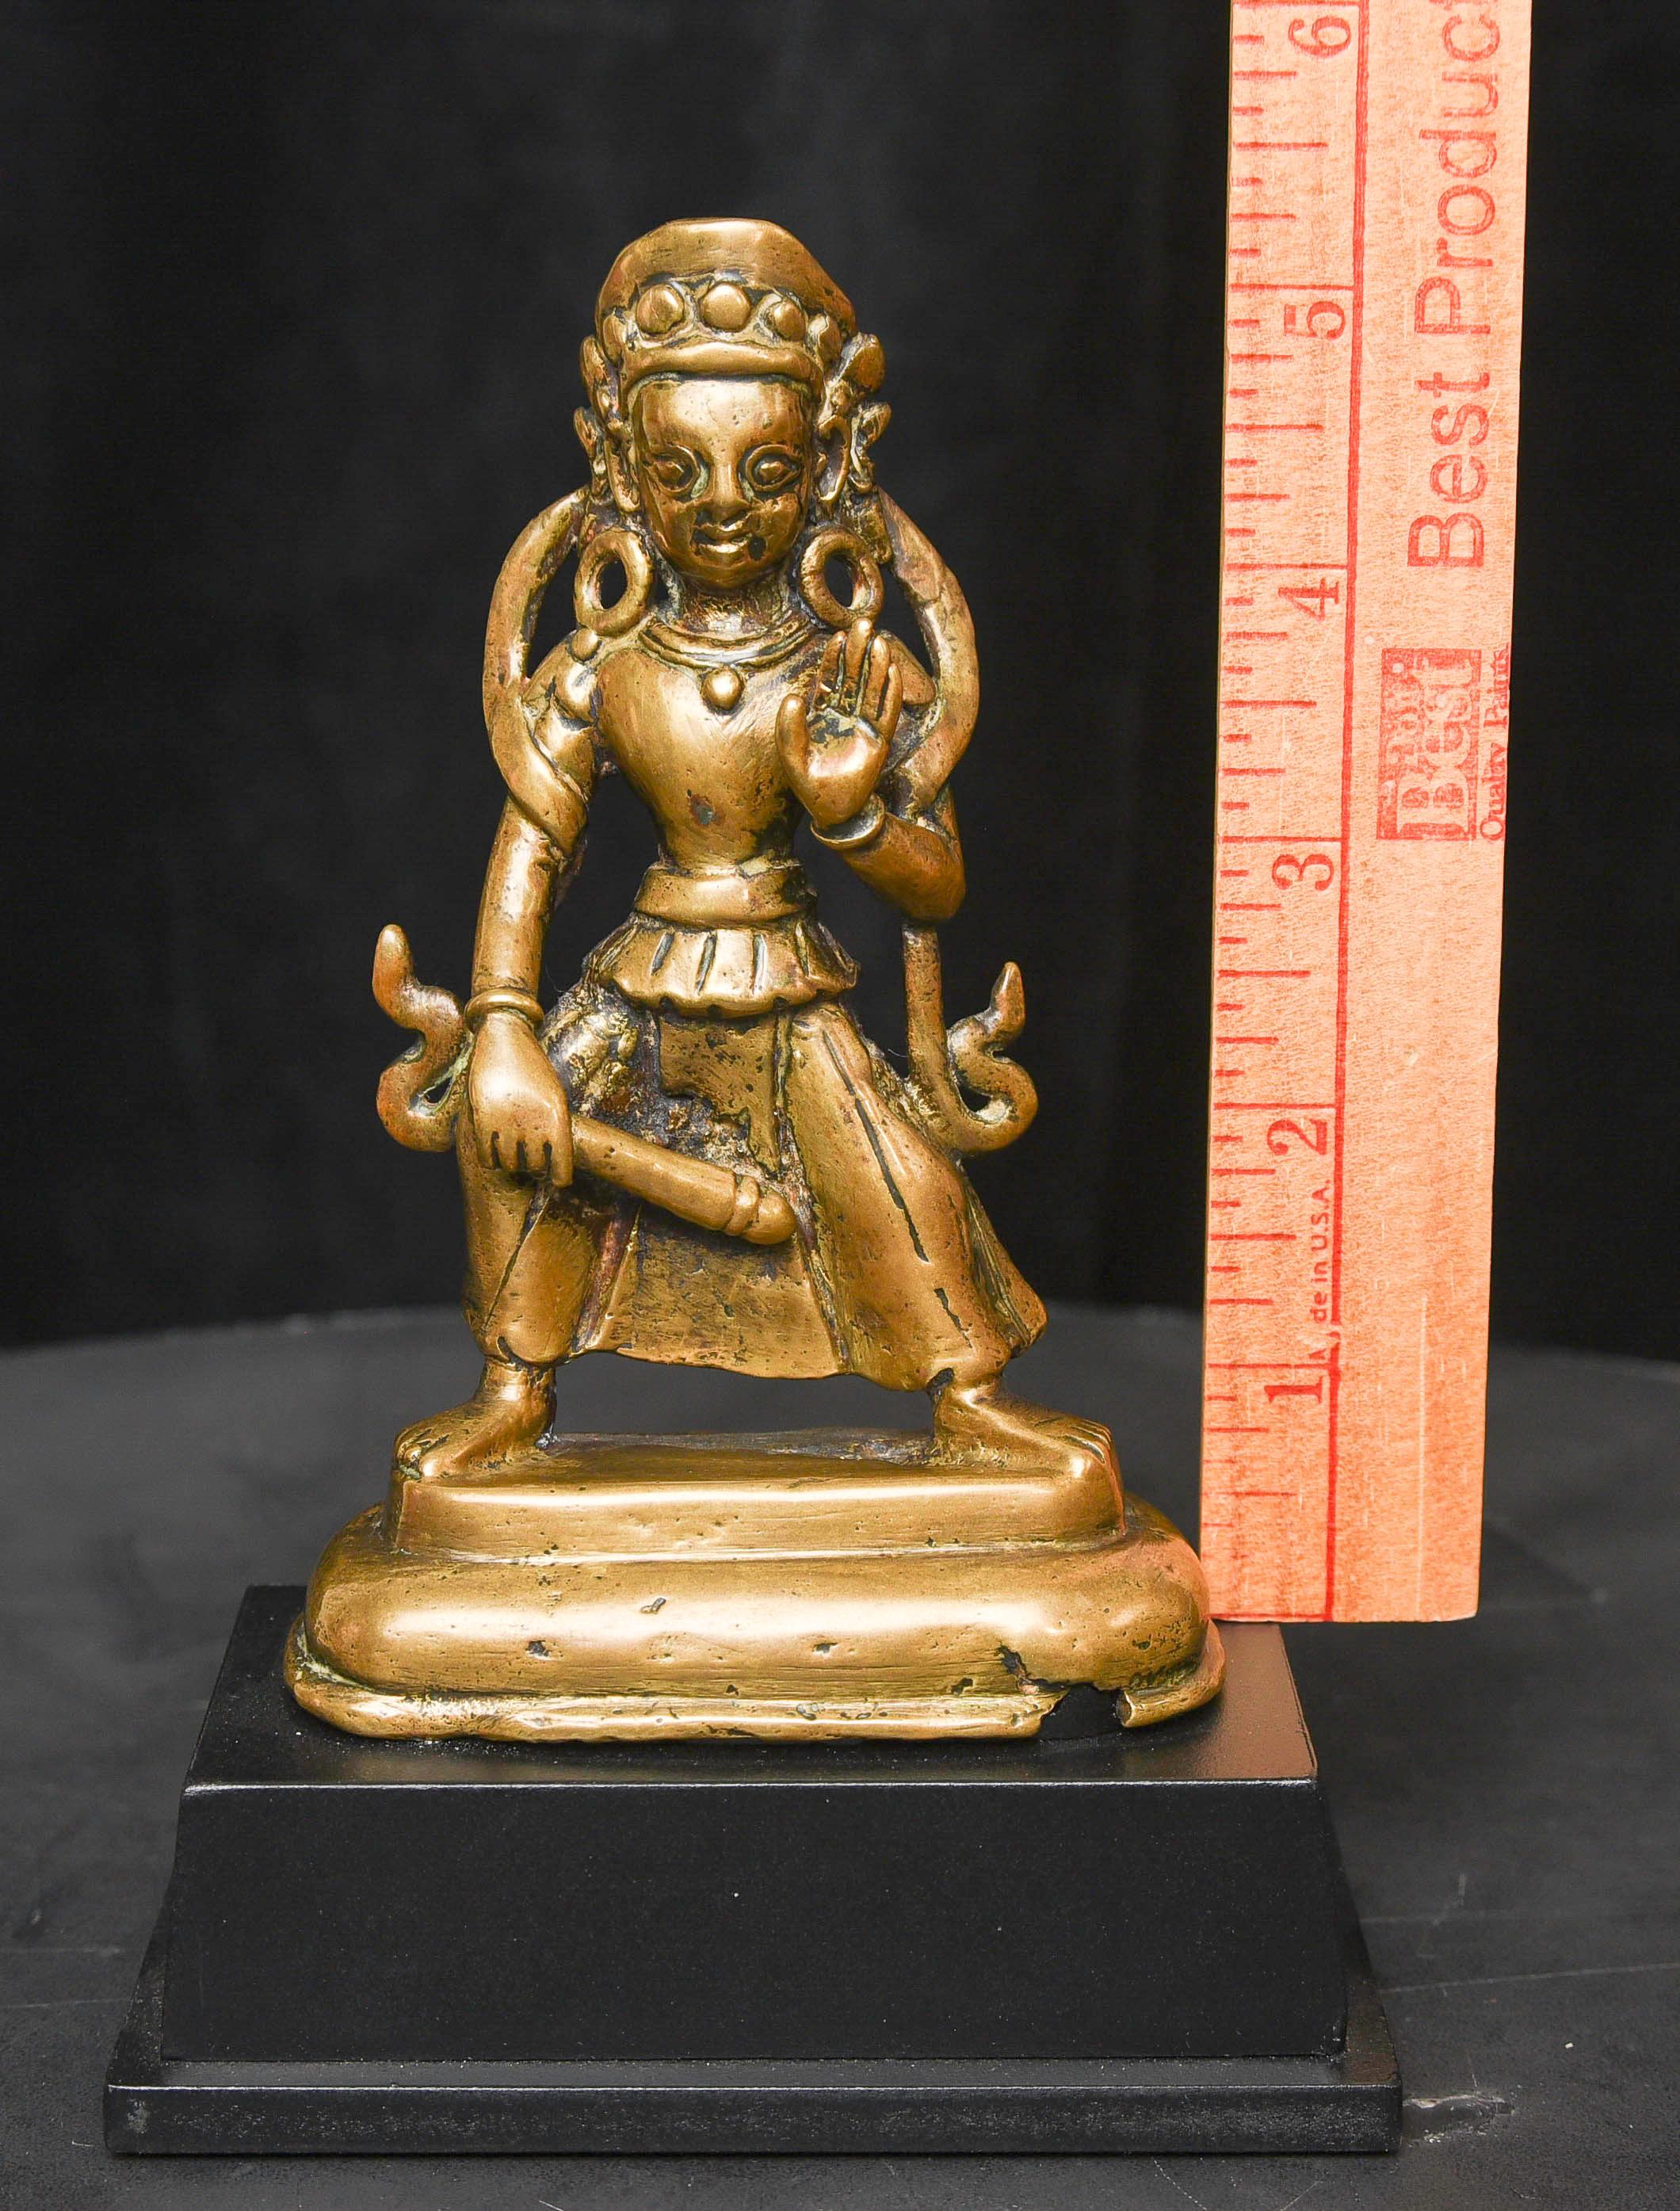 Early Himalayan Bronze Deity - 9588 In Good Condition For Sale In Ukiah, CA